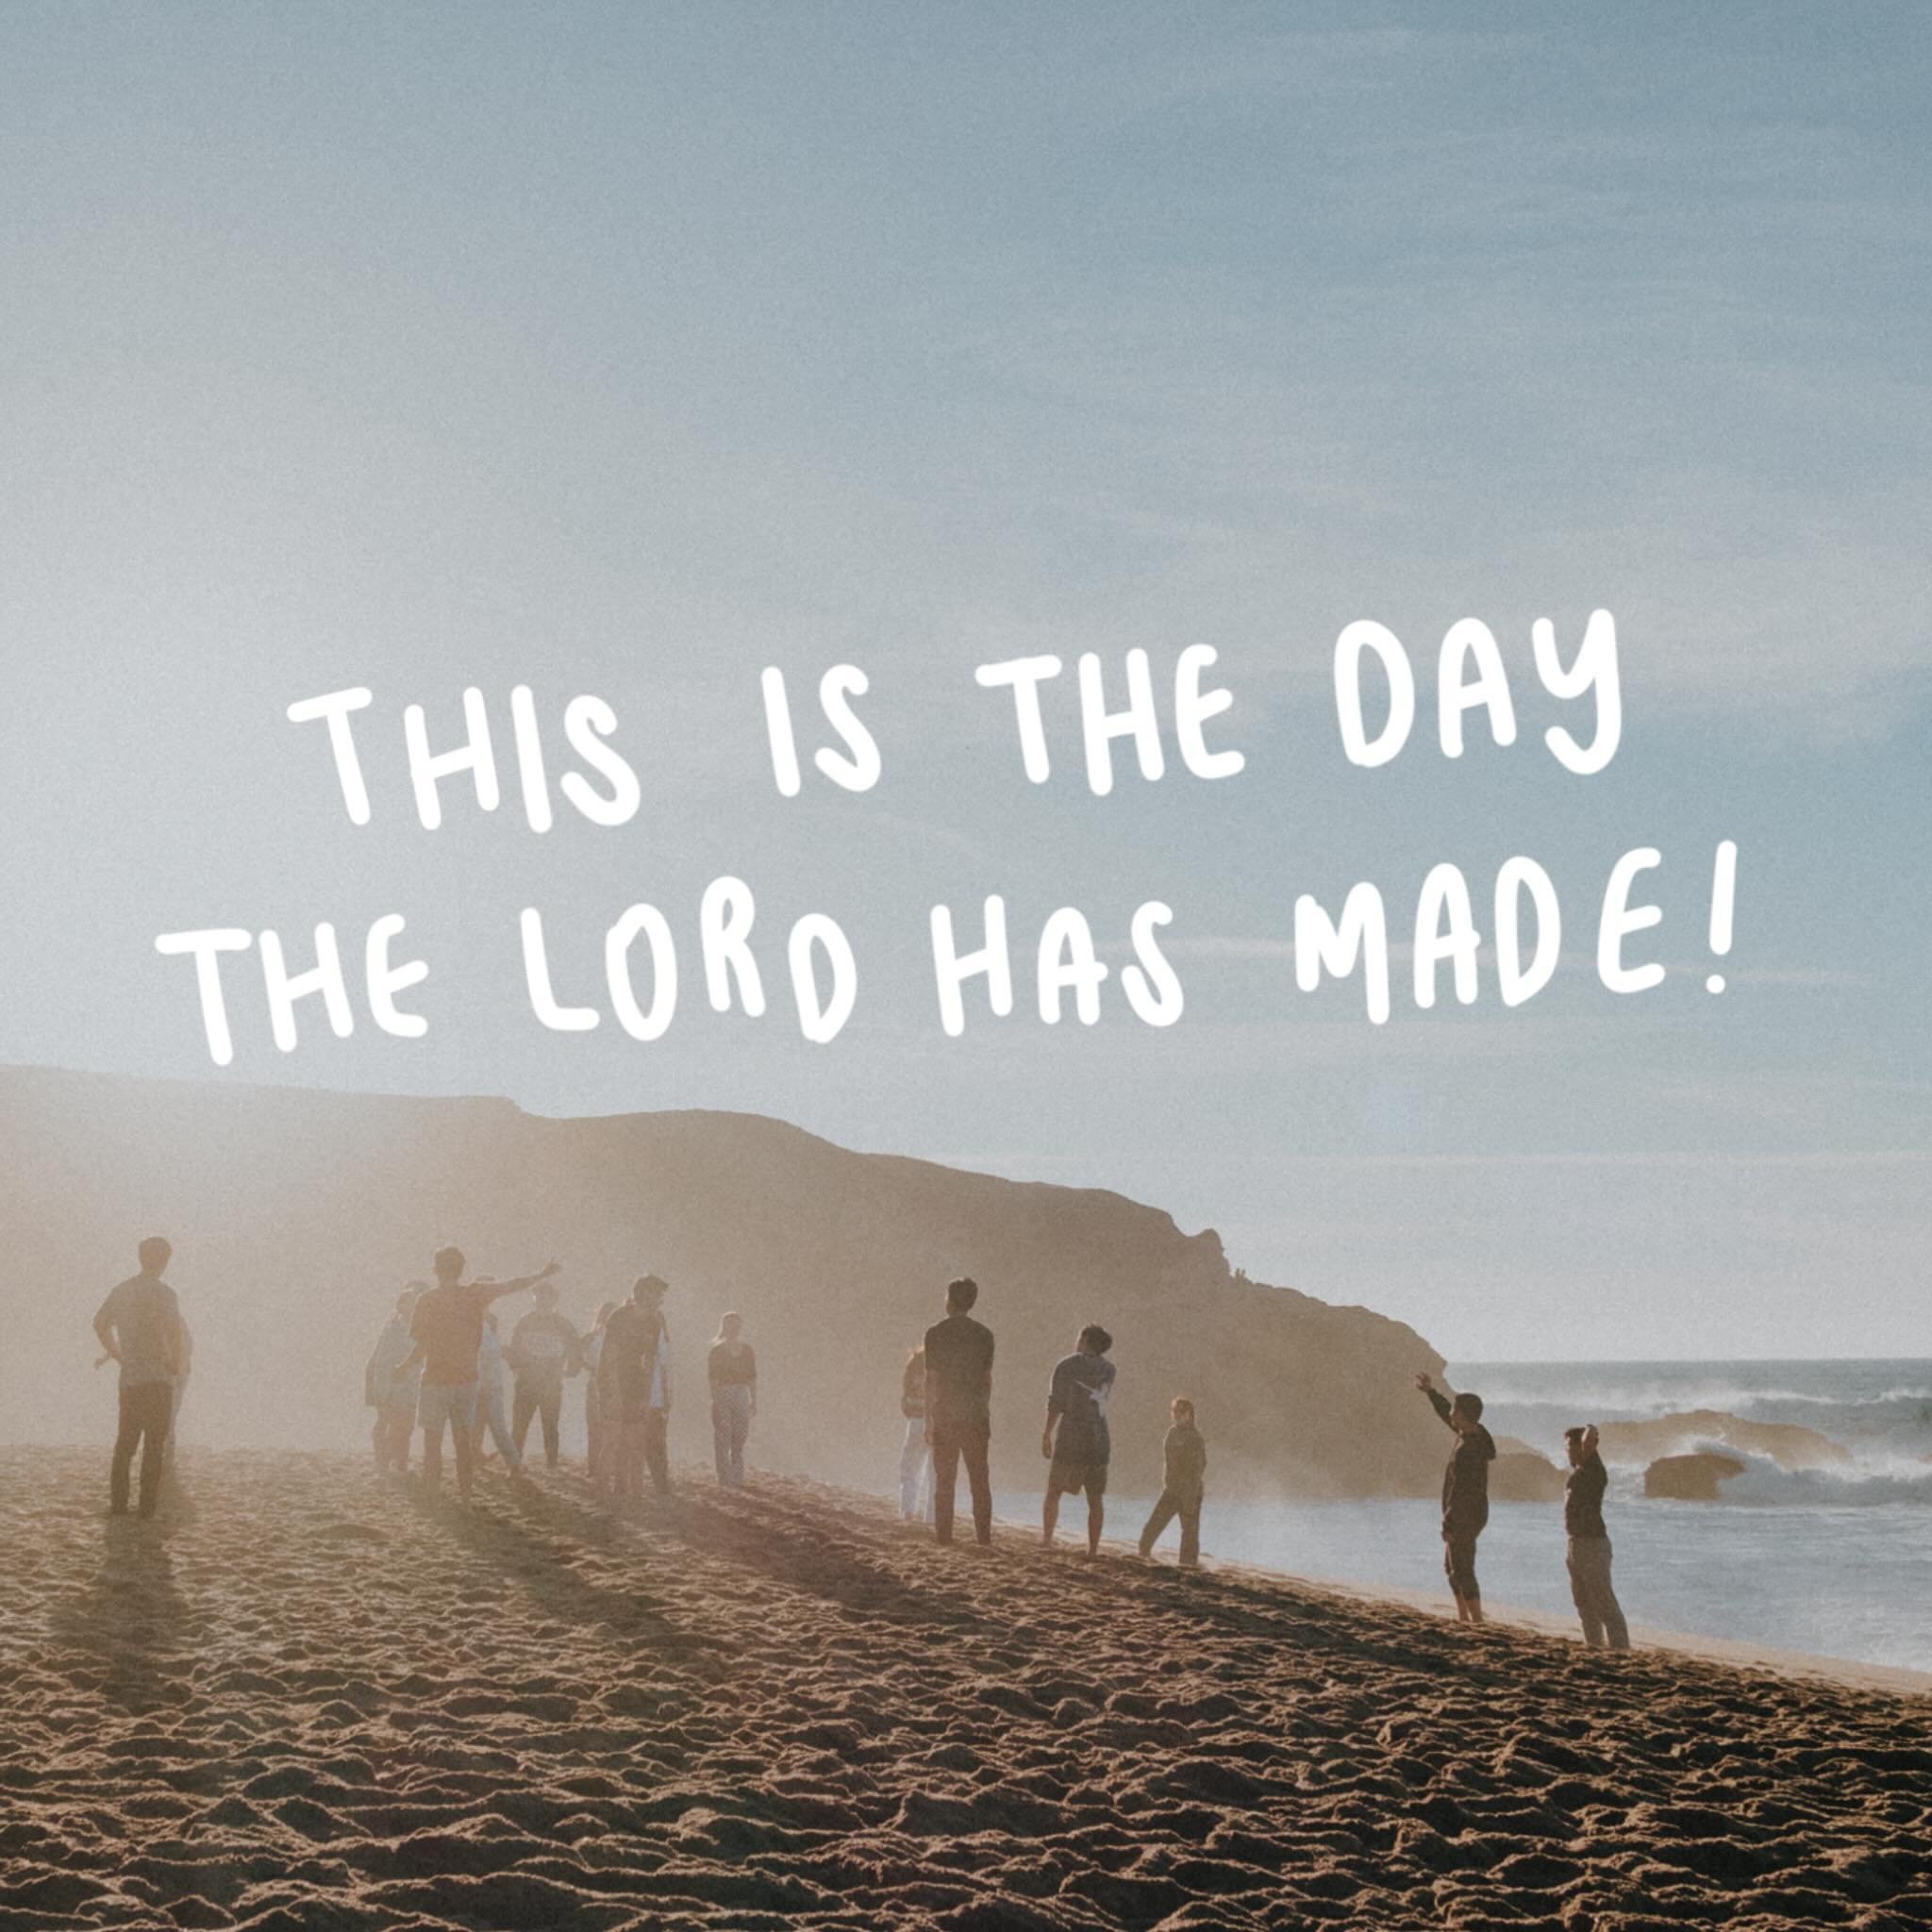 Psalm 118:24
This is the day the LORD has made; let us rejoice and be glad in it.